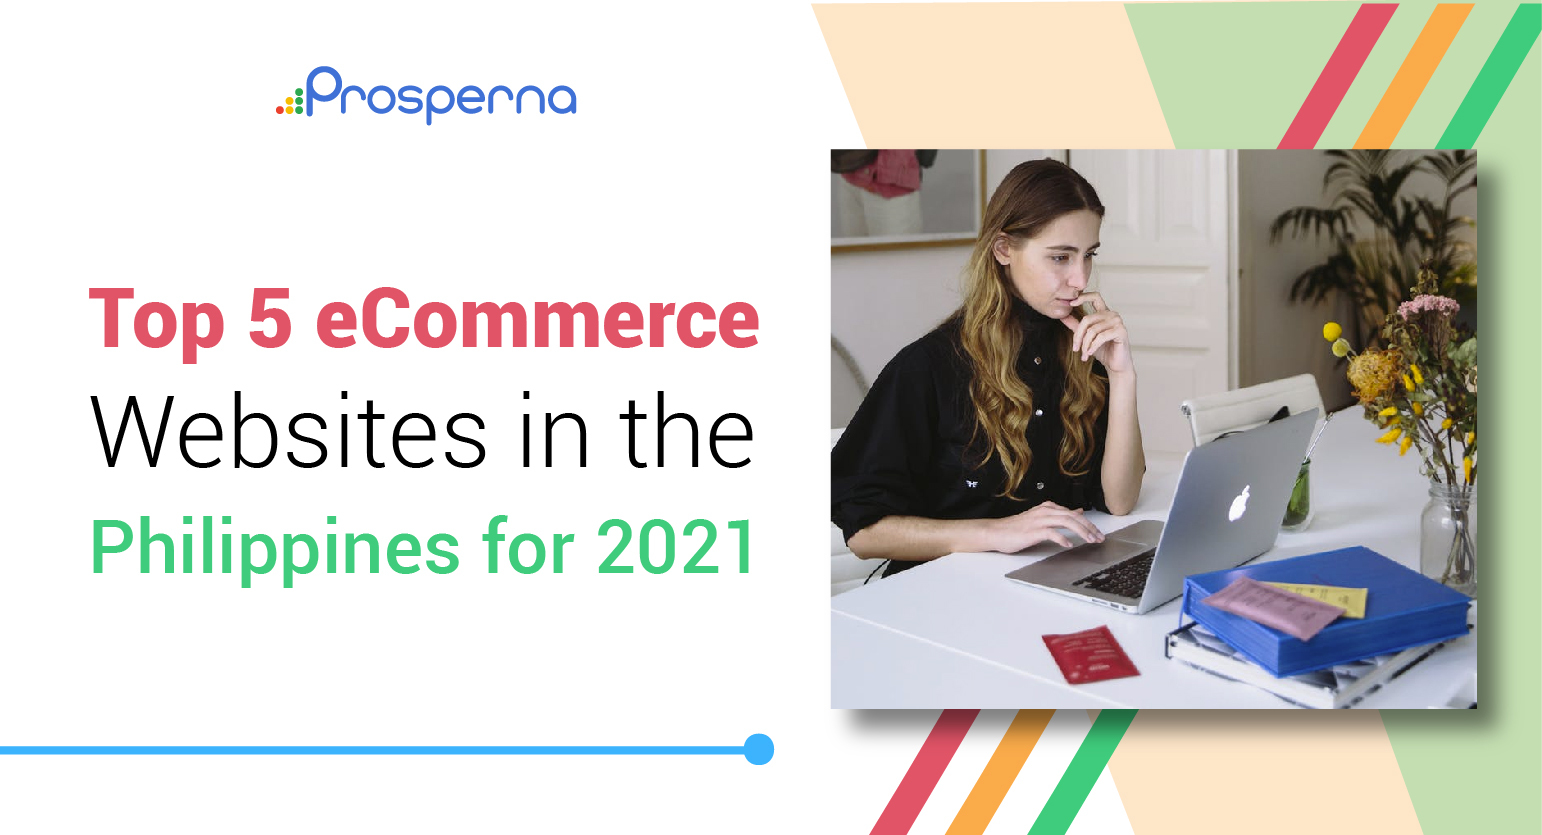 Prosperna Marketing Site | Top 5 eCommerce Websites in the Philippines for 2022